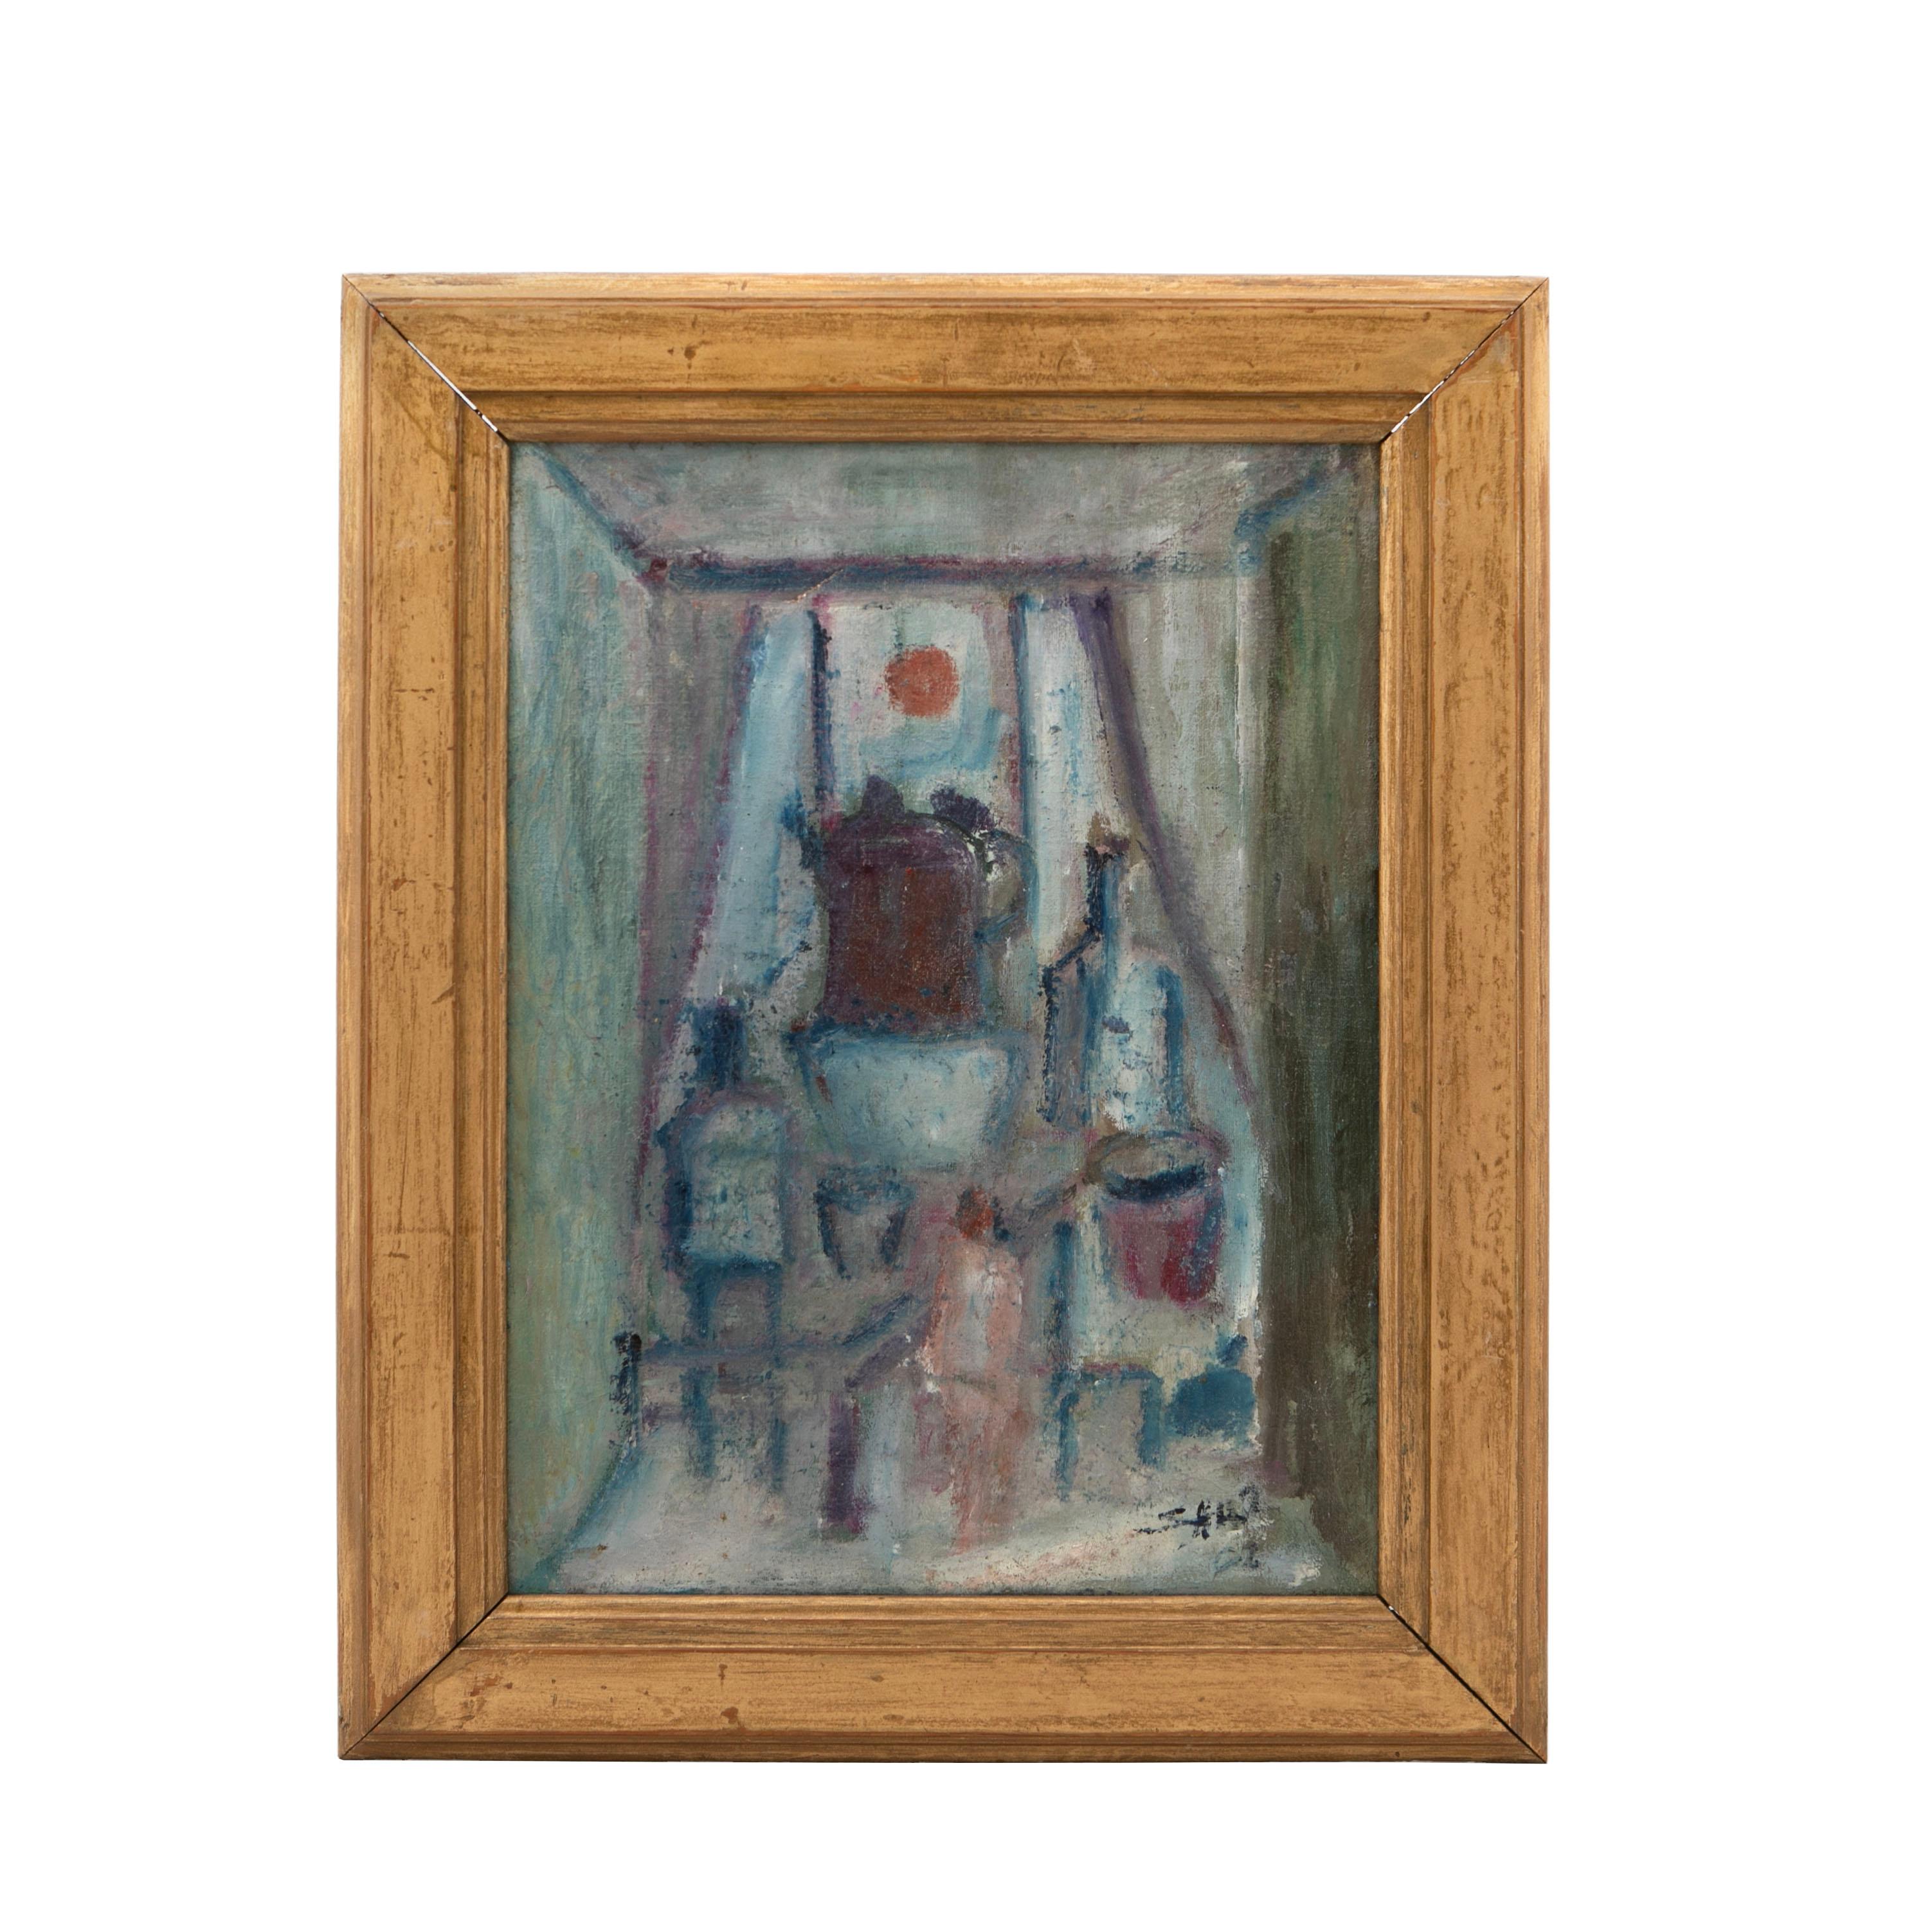 Painted Ali Afshar Still Life Painting Interior - Oil on Canvas, Signed For Sale